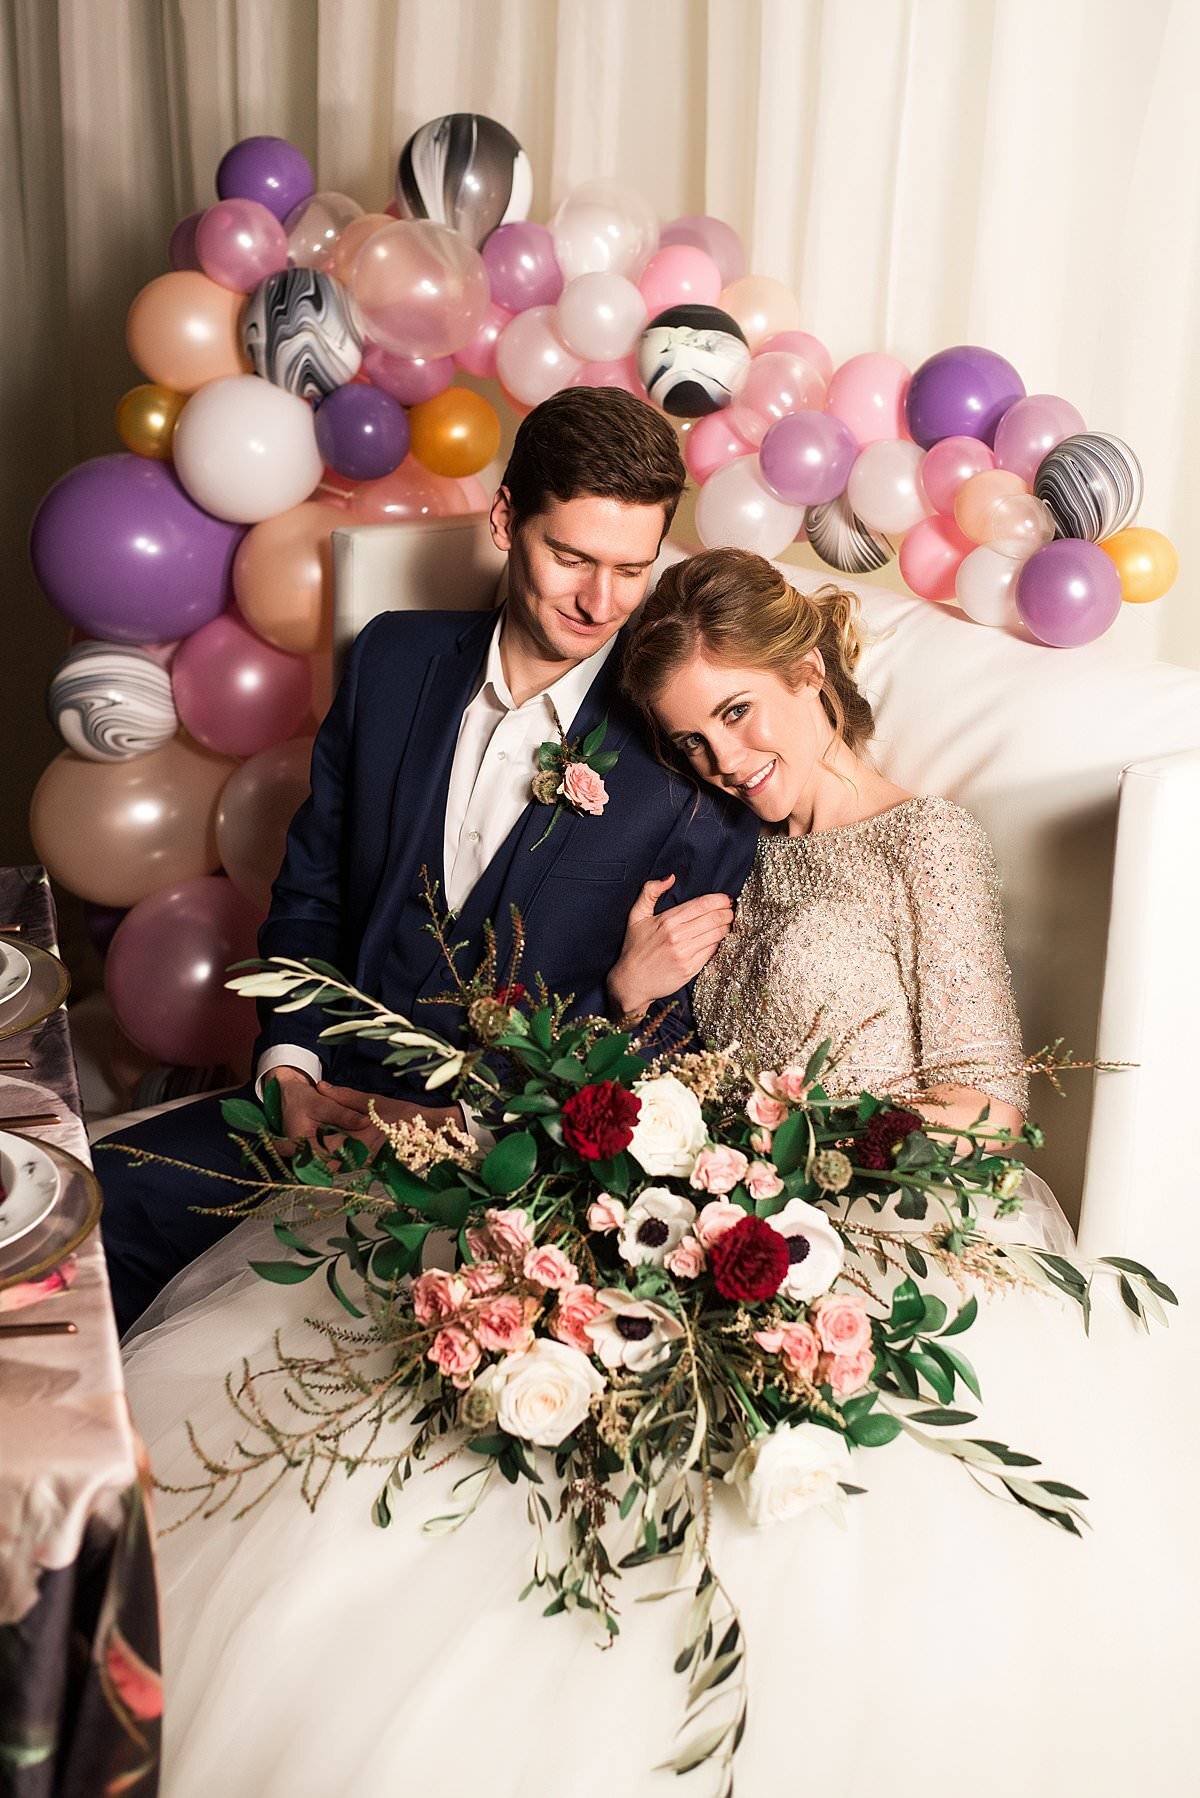 Couple sitting together on couch with balloon instillation and large wedding bouquet